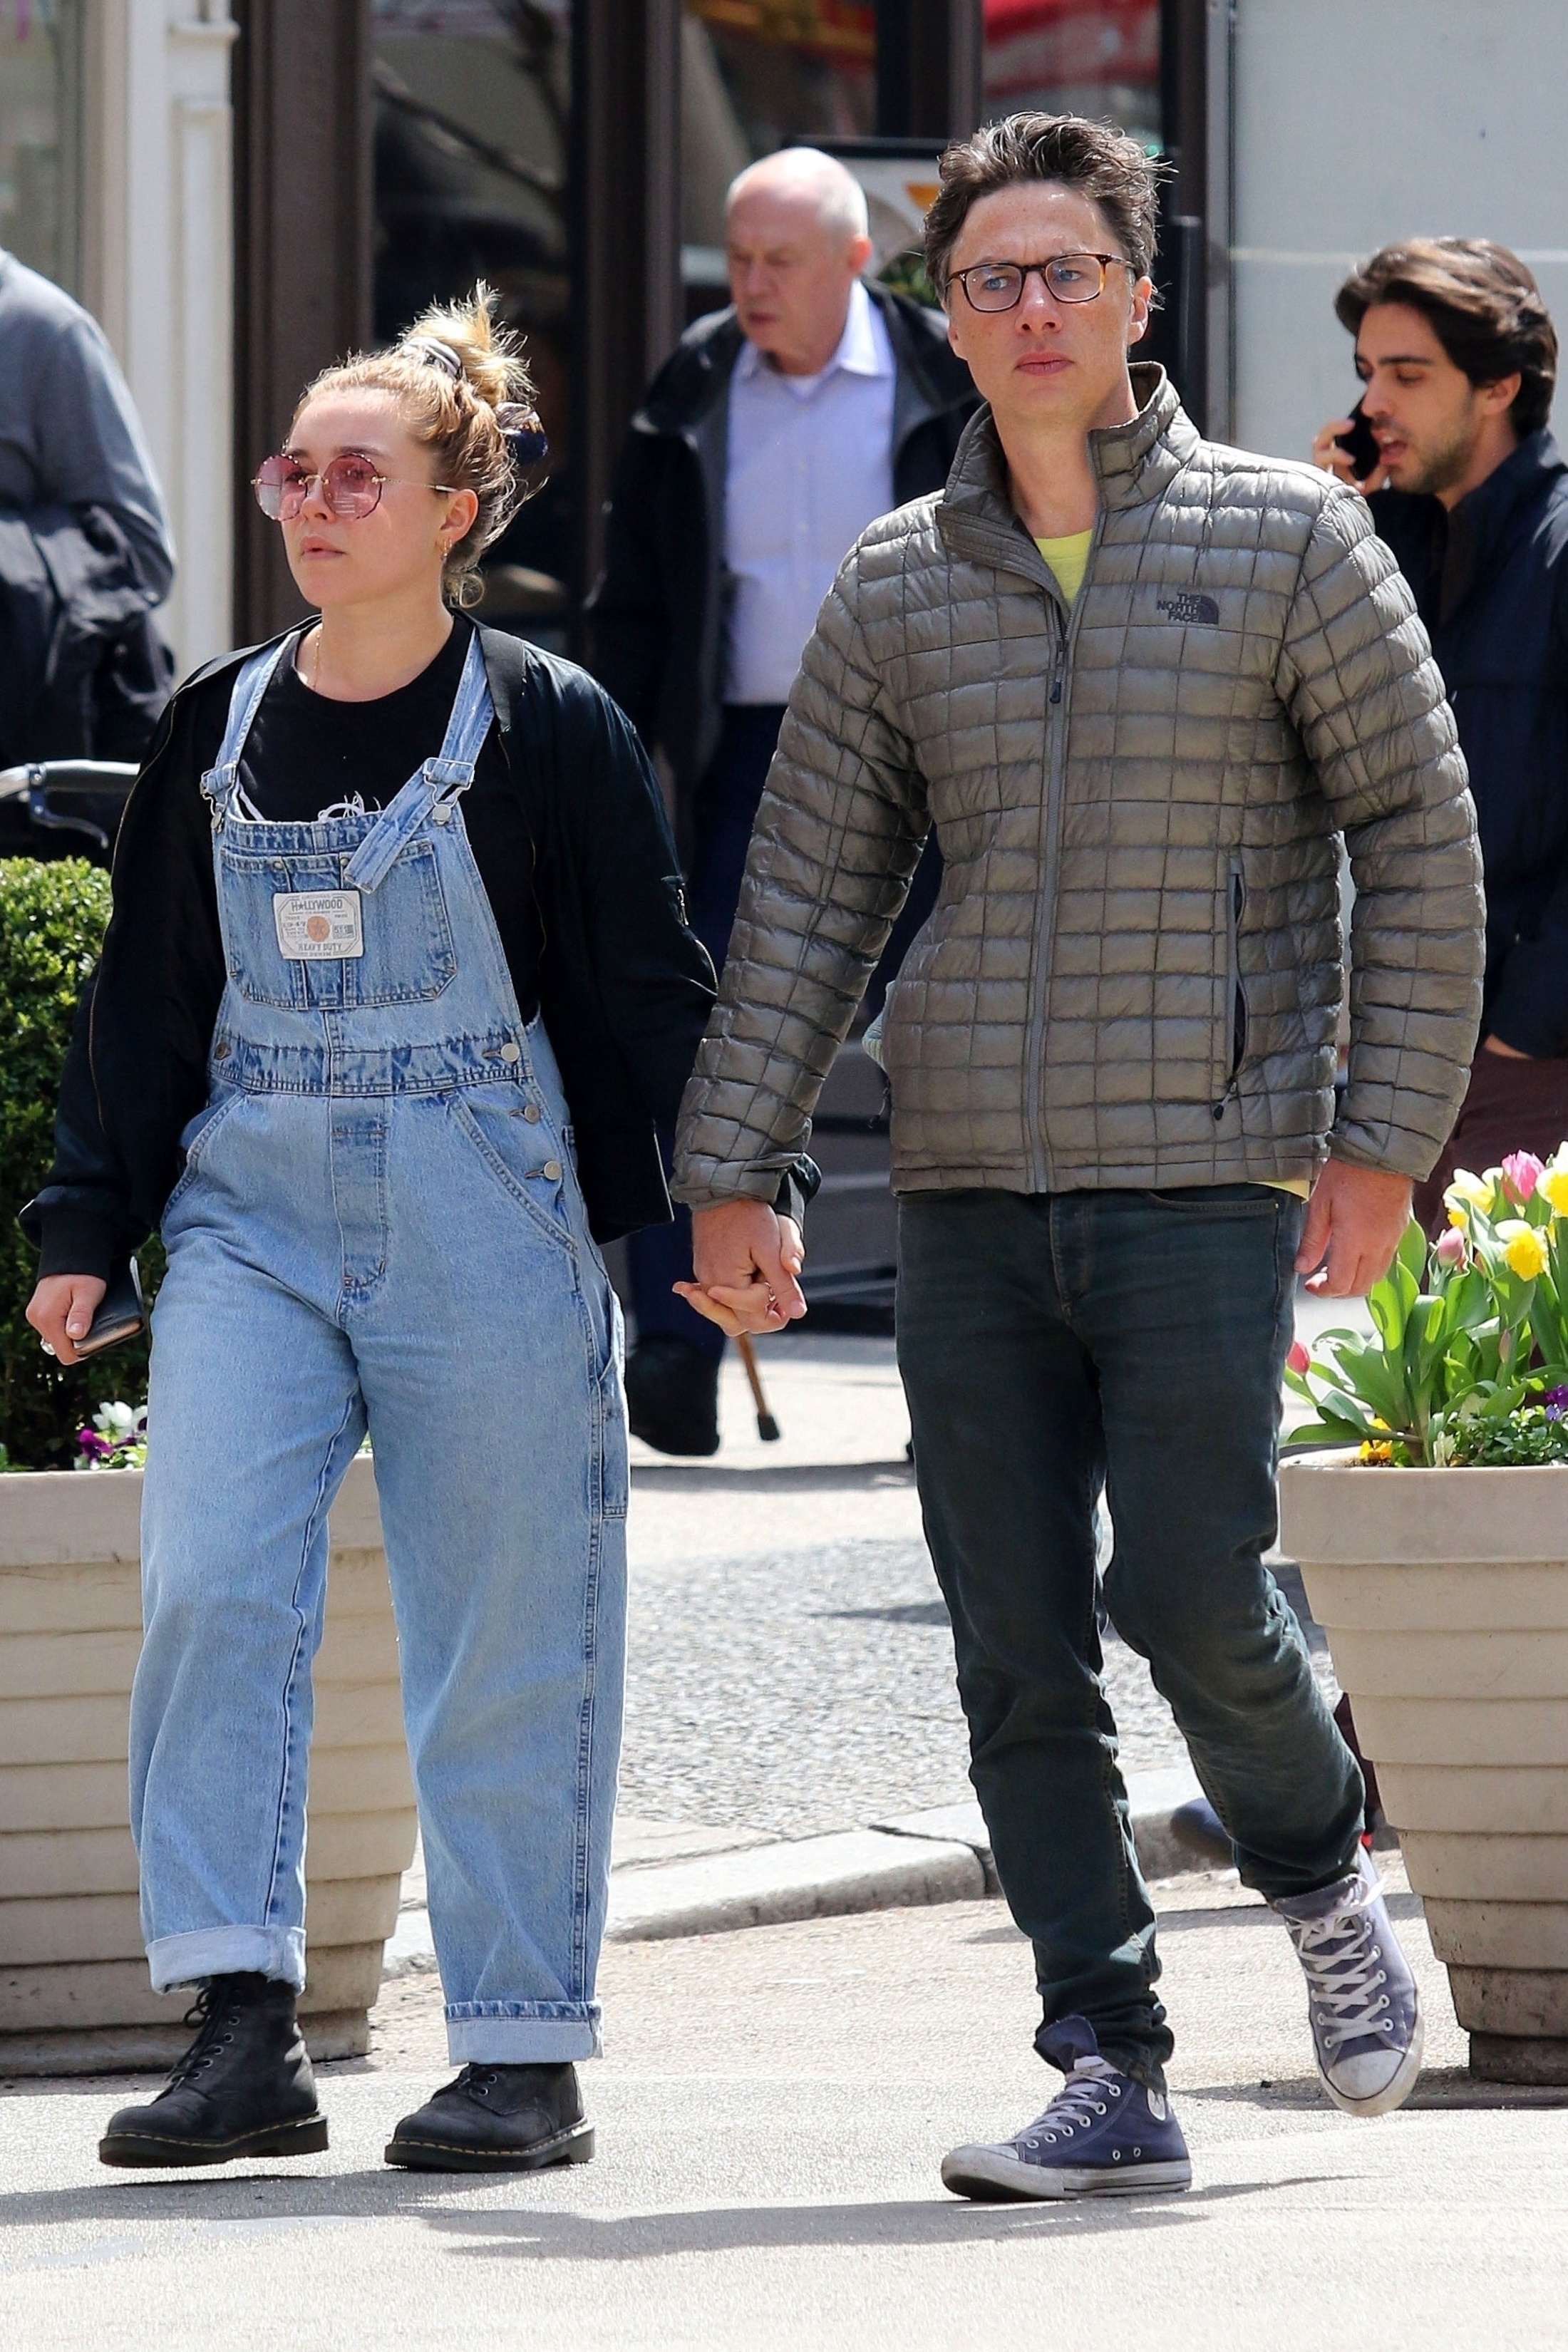 <p>In April 2019, actor-director Zach Braff was photographed holding hands in New York City with "Fighting With My Family," "Little Women" and "Black Widow" actress Florence Pugh, who was newly 23 at the time. The pair -- who have 21 years between them -- later took their <a href="https://www.wonderwall.com/news/zach-braff-dating-florence-pugh-age-difference-report-3021281.article">romance</a> more public. They split in 2022 after three years of dating.</p>